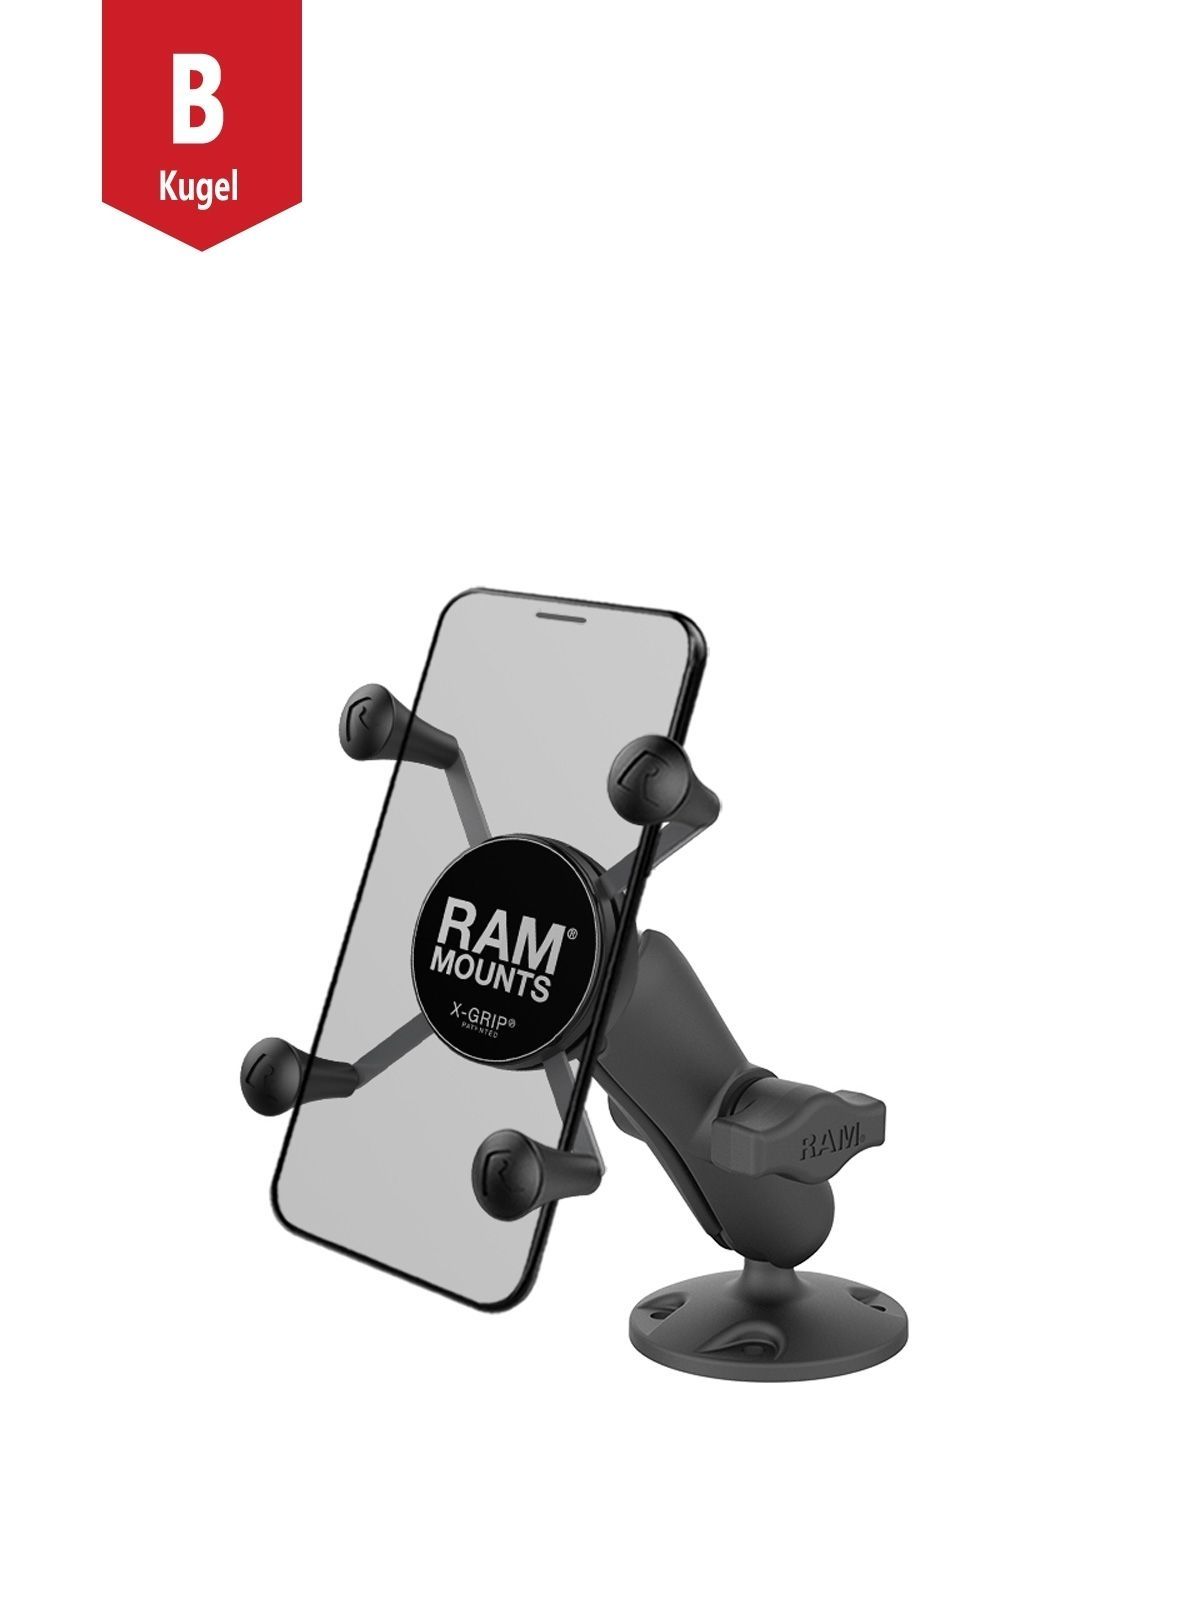 RAM Mounts X-Grip High-Strength Composite Phone Mount with Drill-Down Base - B-Ball